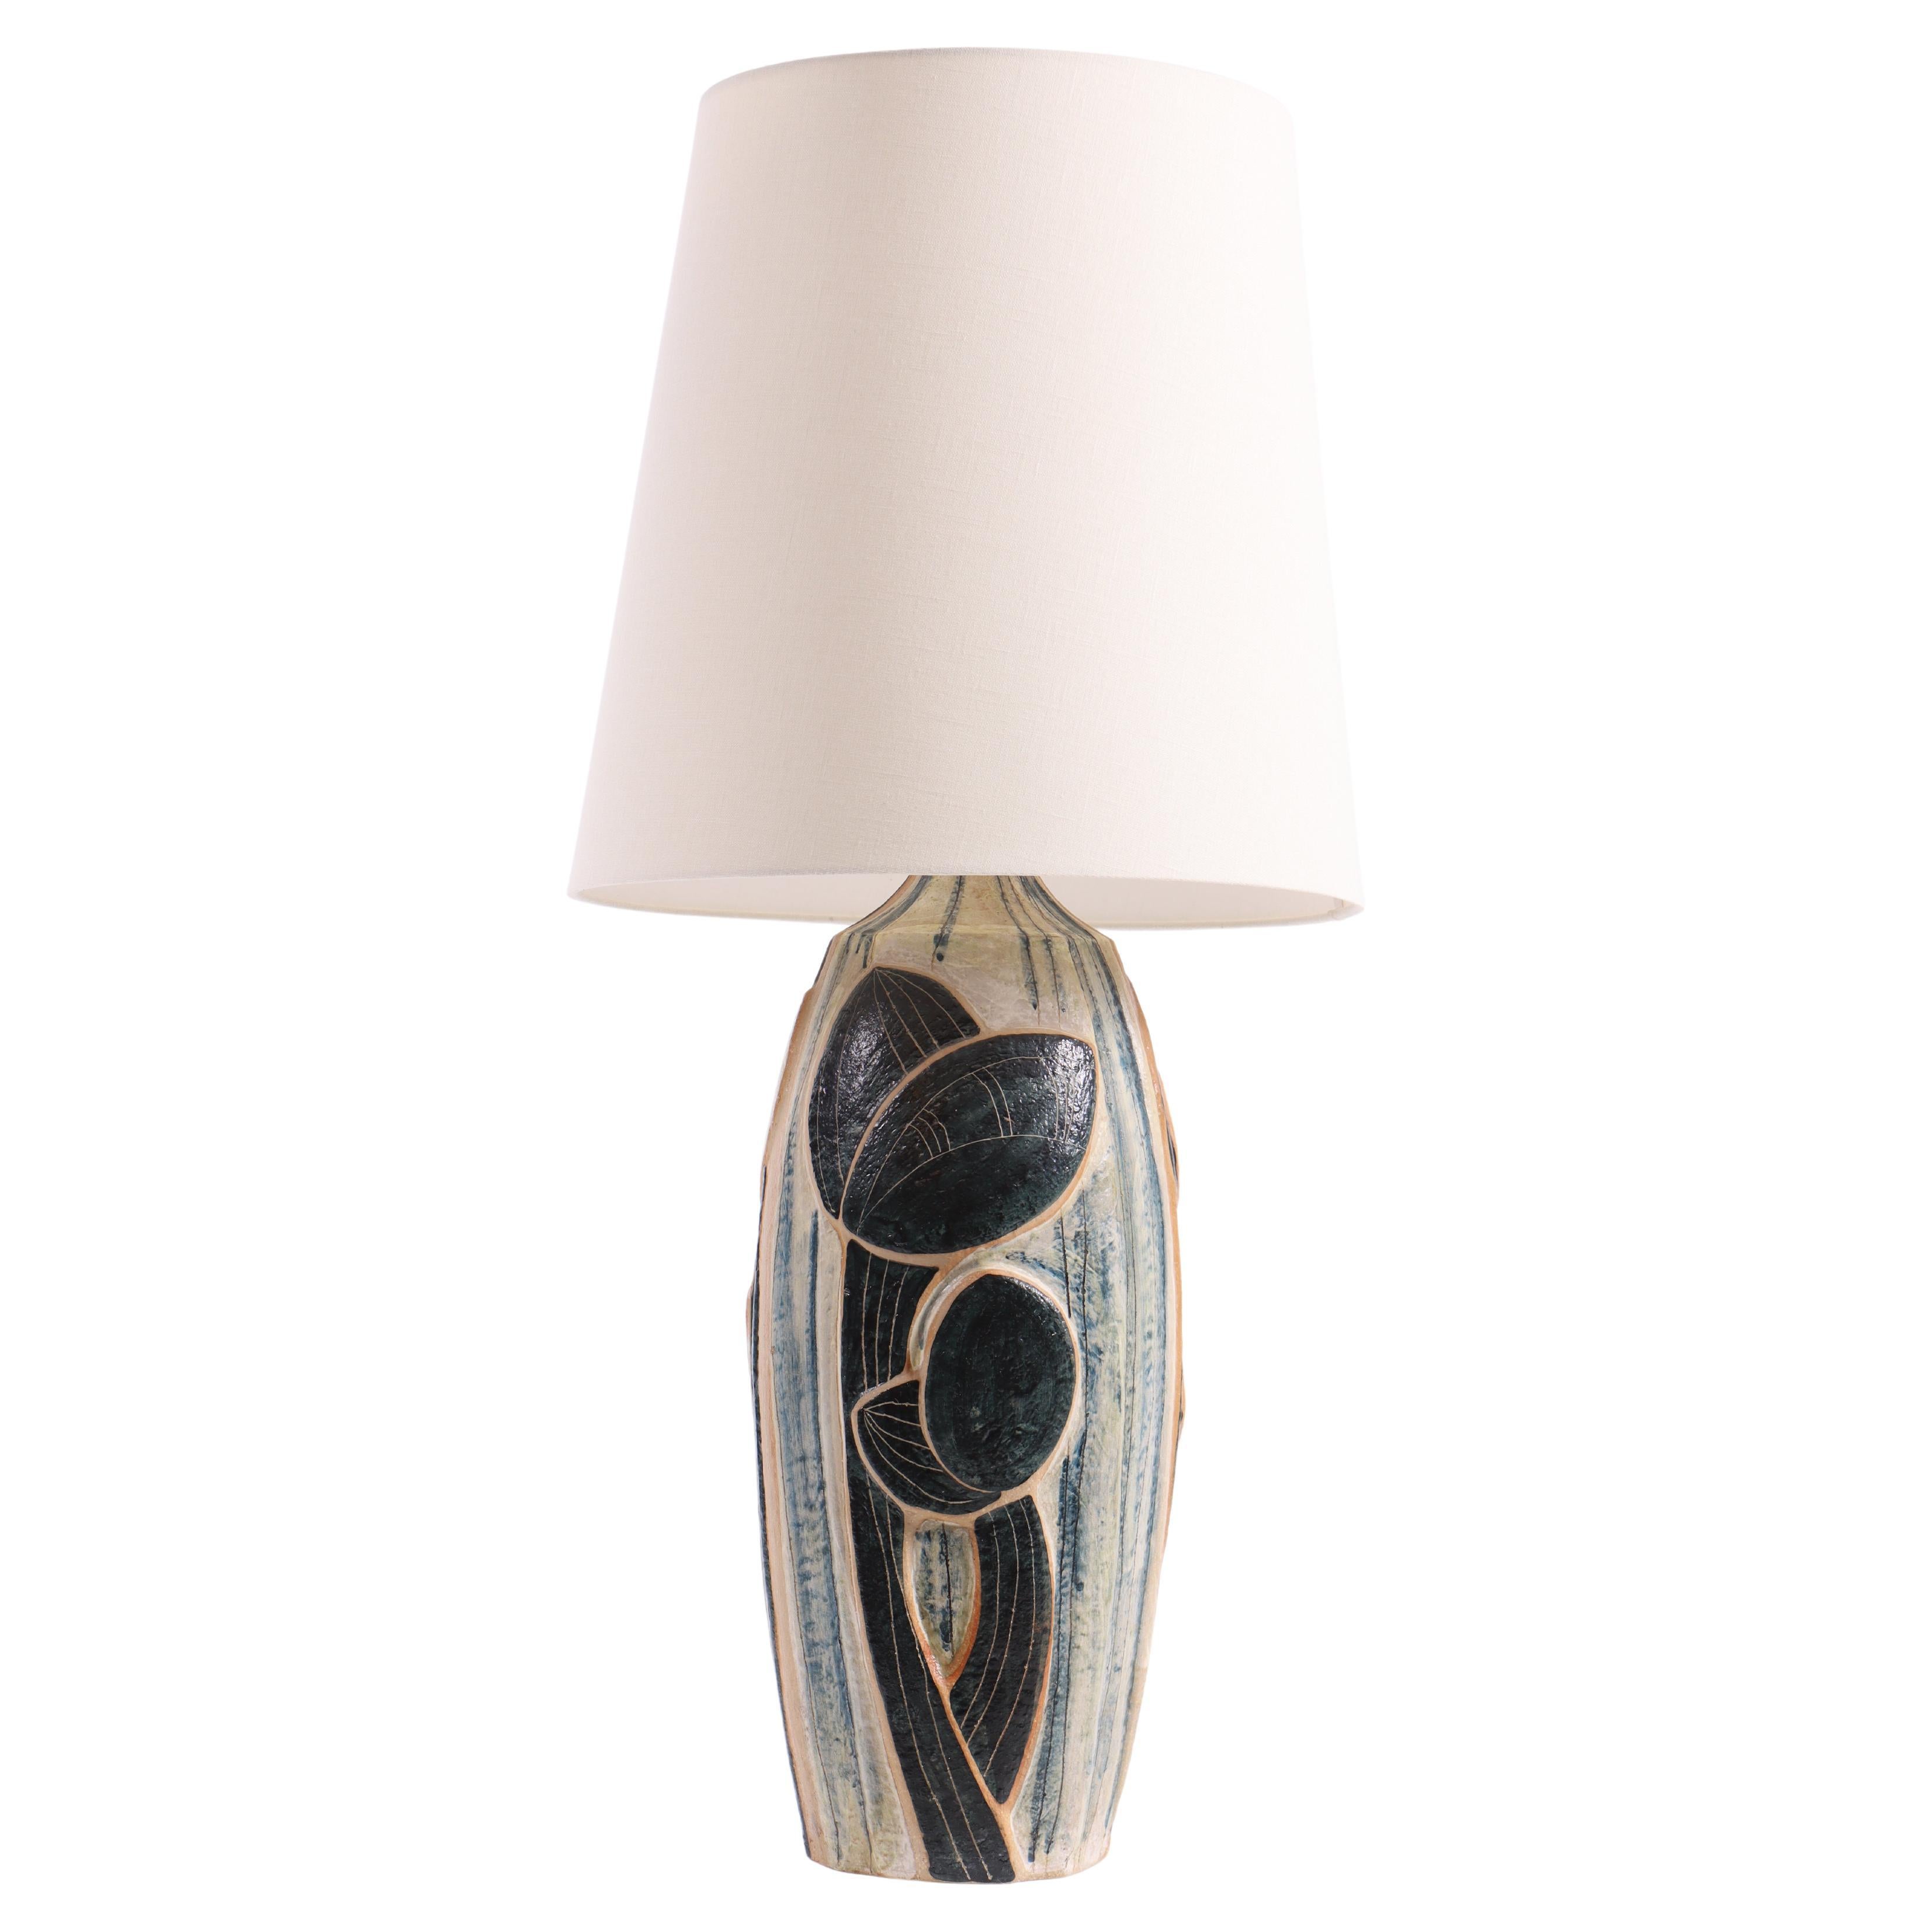 Large Midcentury Table Lamp in Ceramic by Noomi Backhausen, Denmark 1960s For Sale